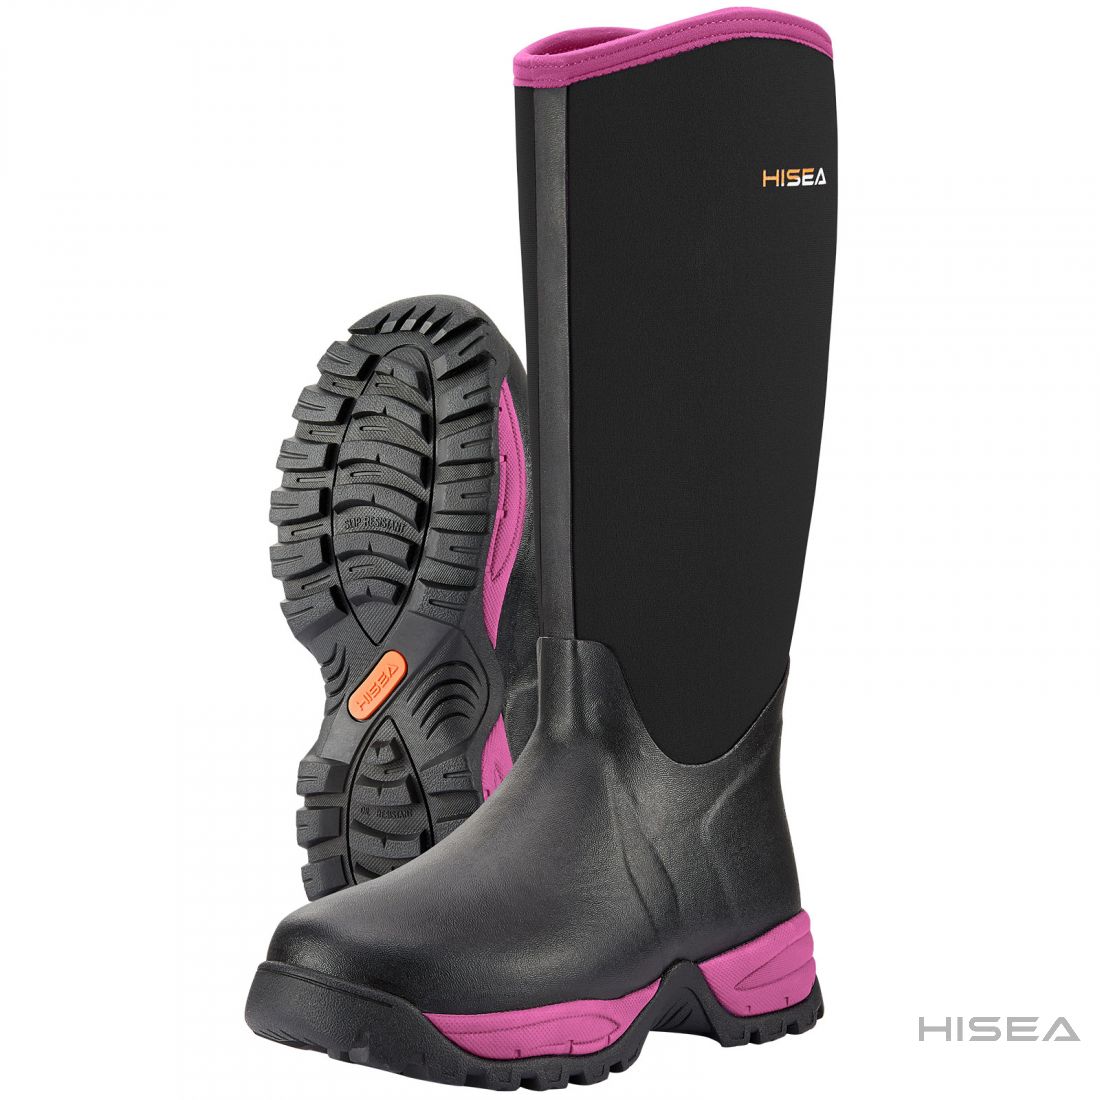 Women's Insulated Rubber Snow Boots